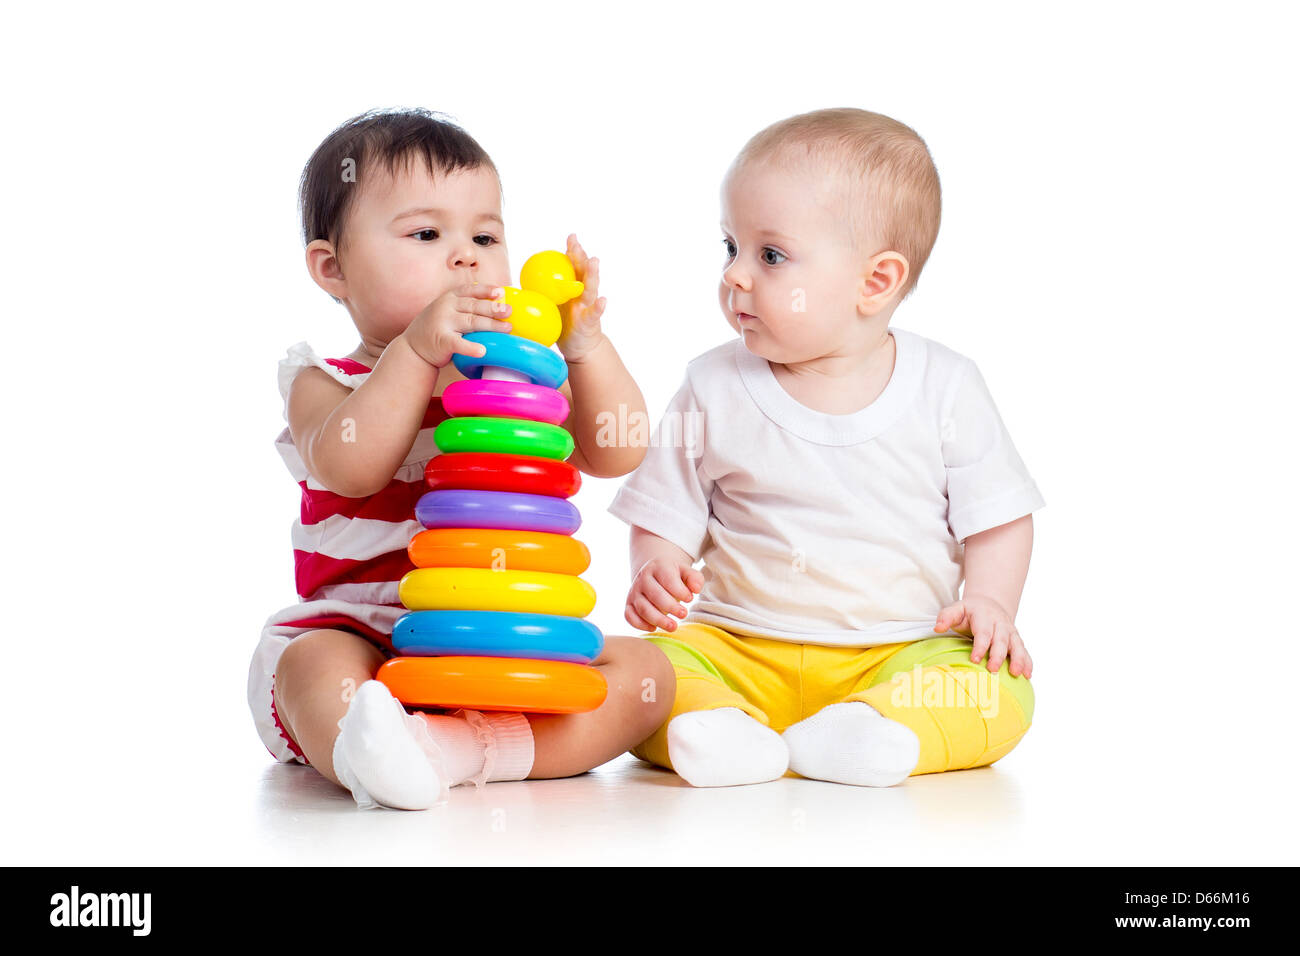 kids girls playing toy together Stock Photo